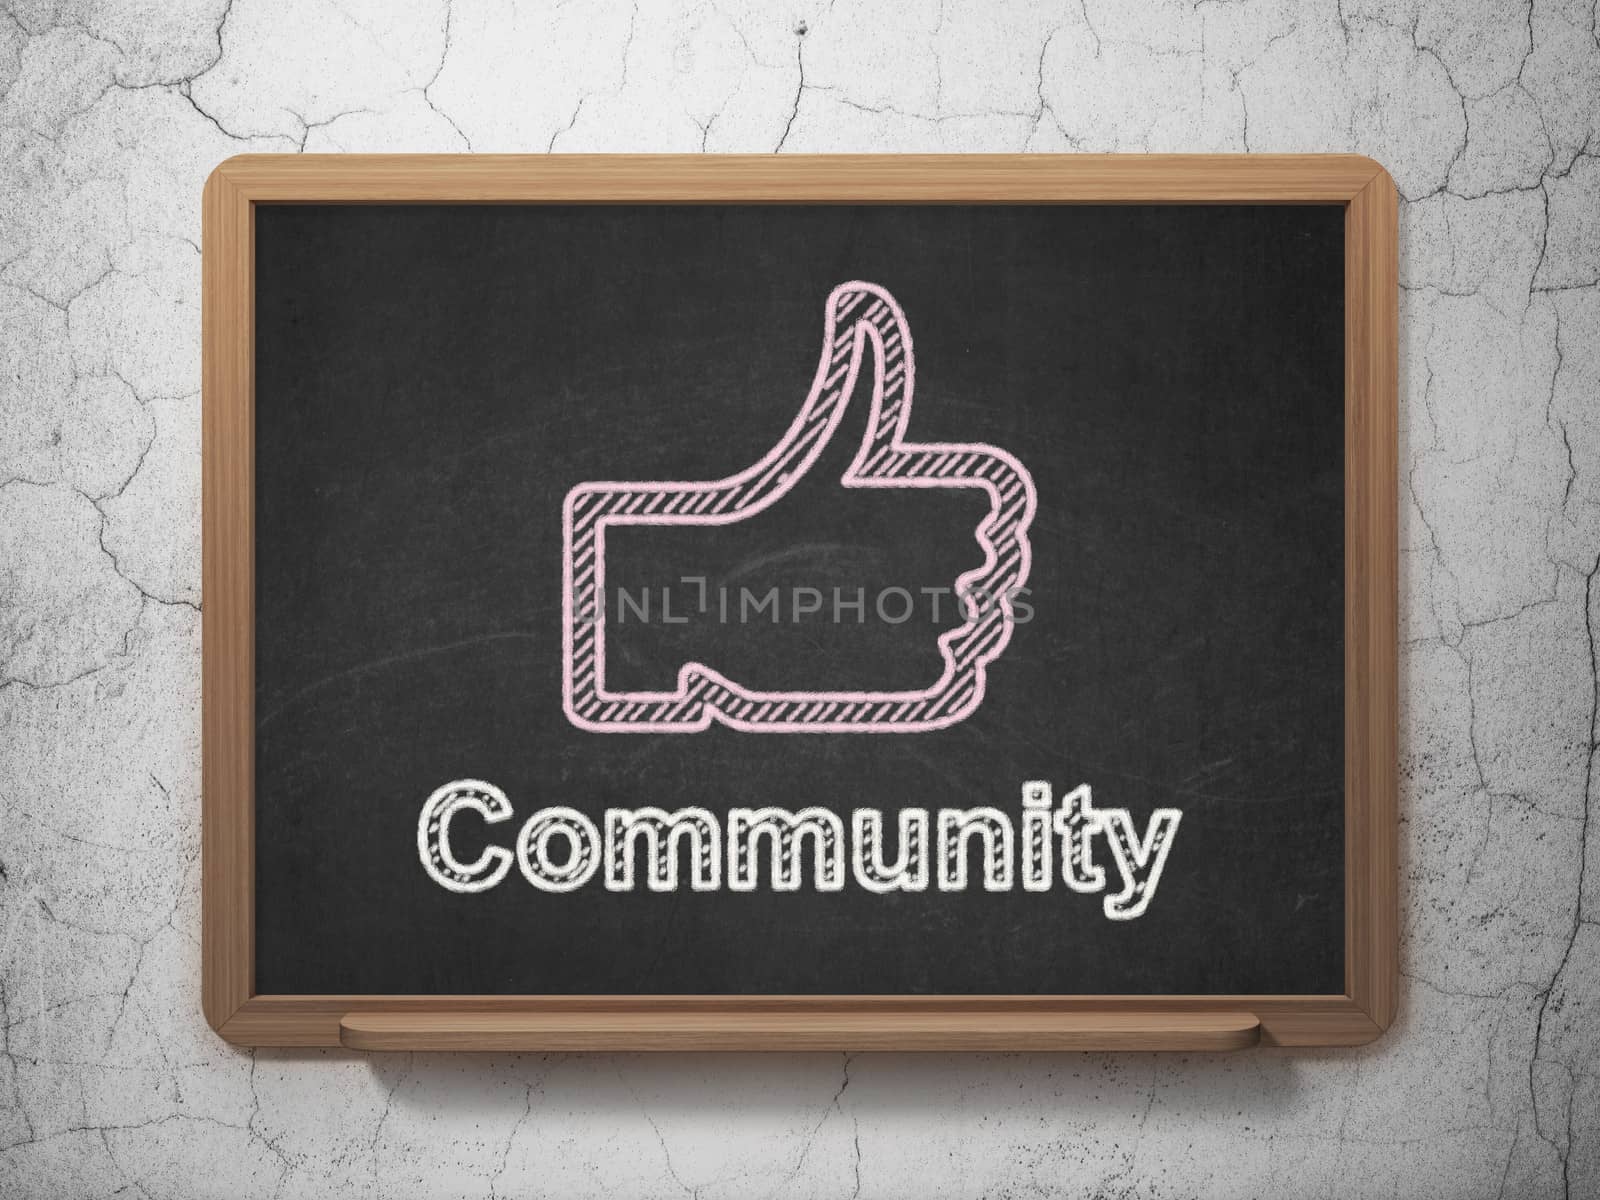 Social network concept: Thumb Up icon and text Community on Black chalkboard on grunge wall background, 3d render